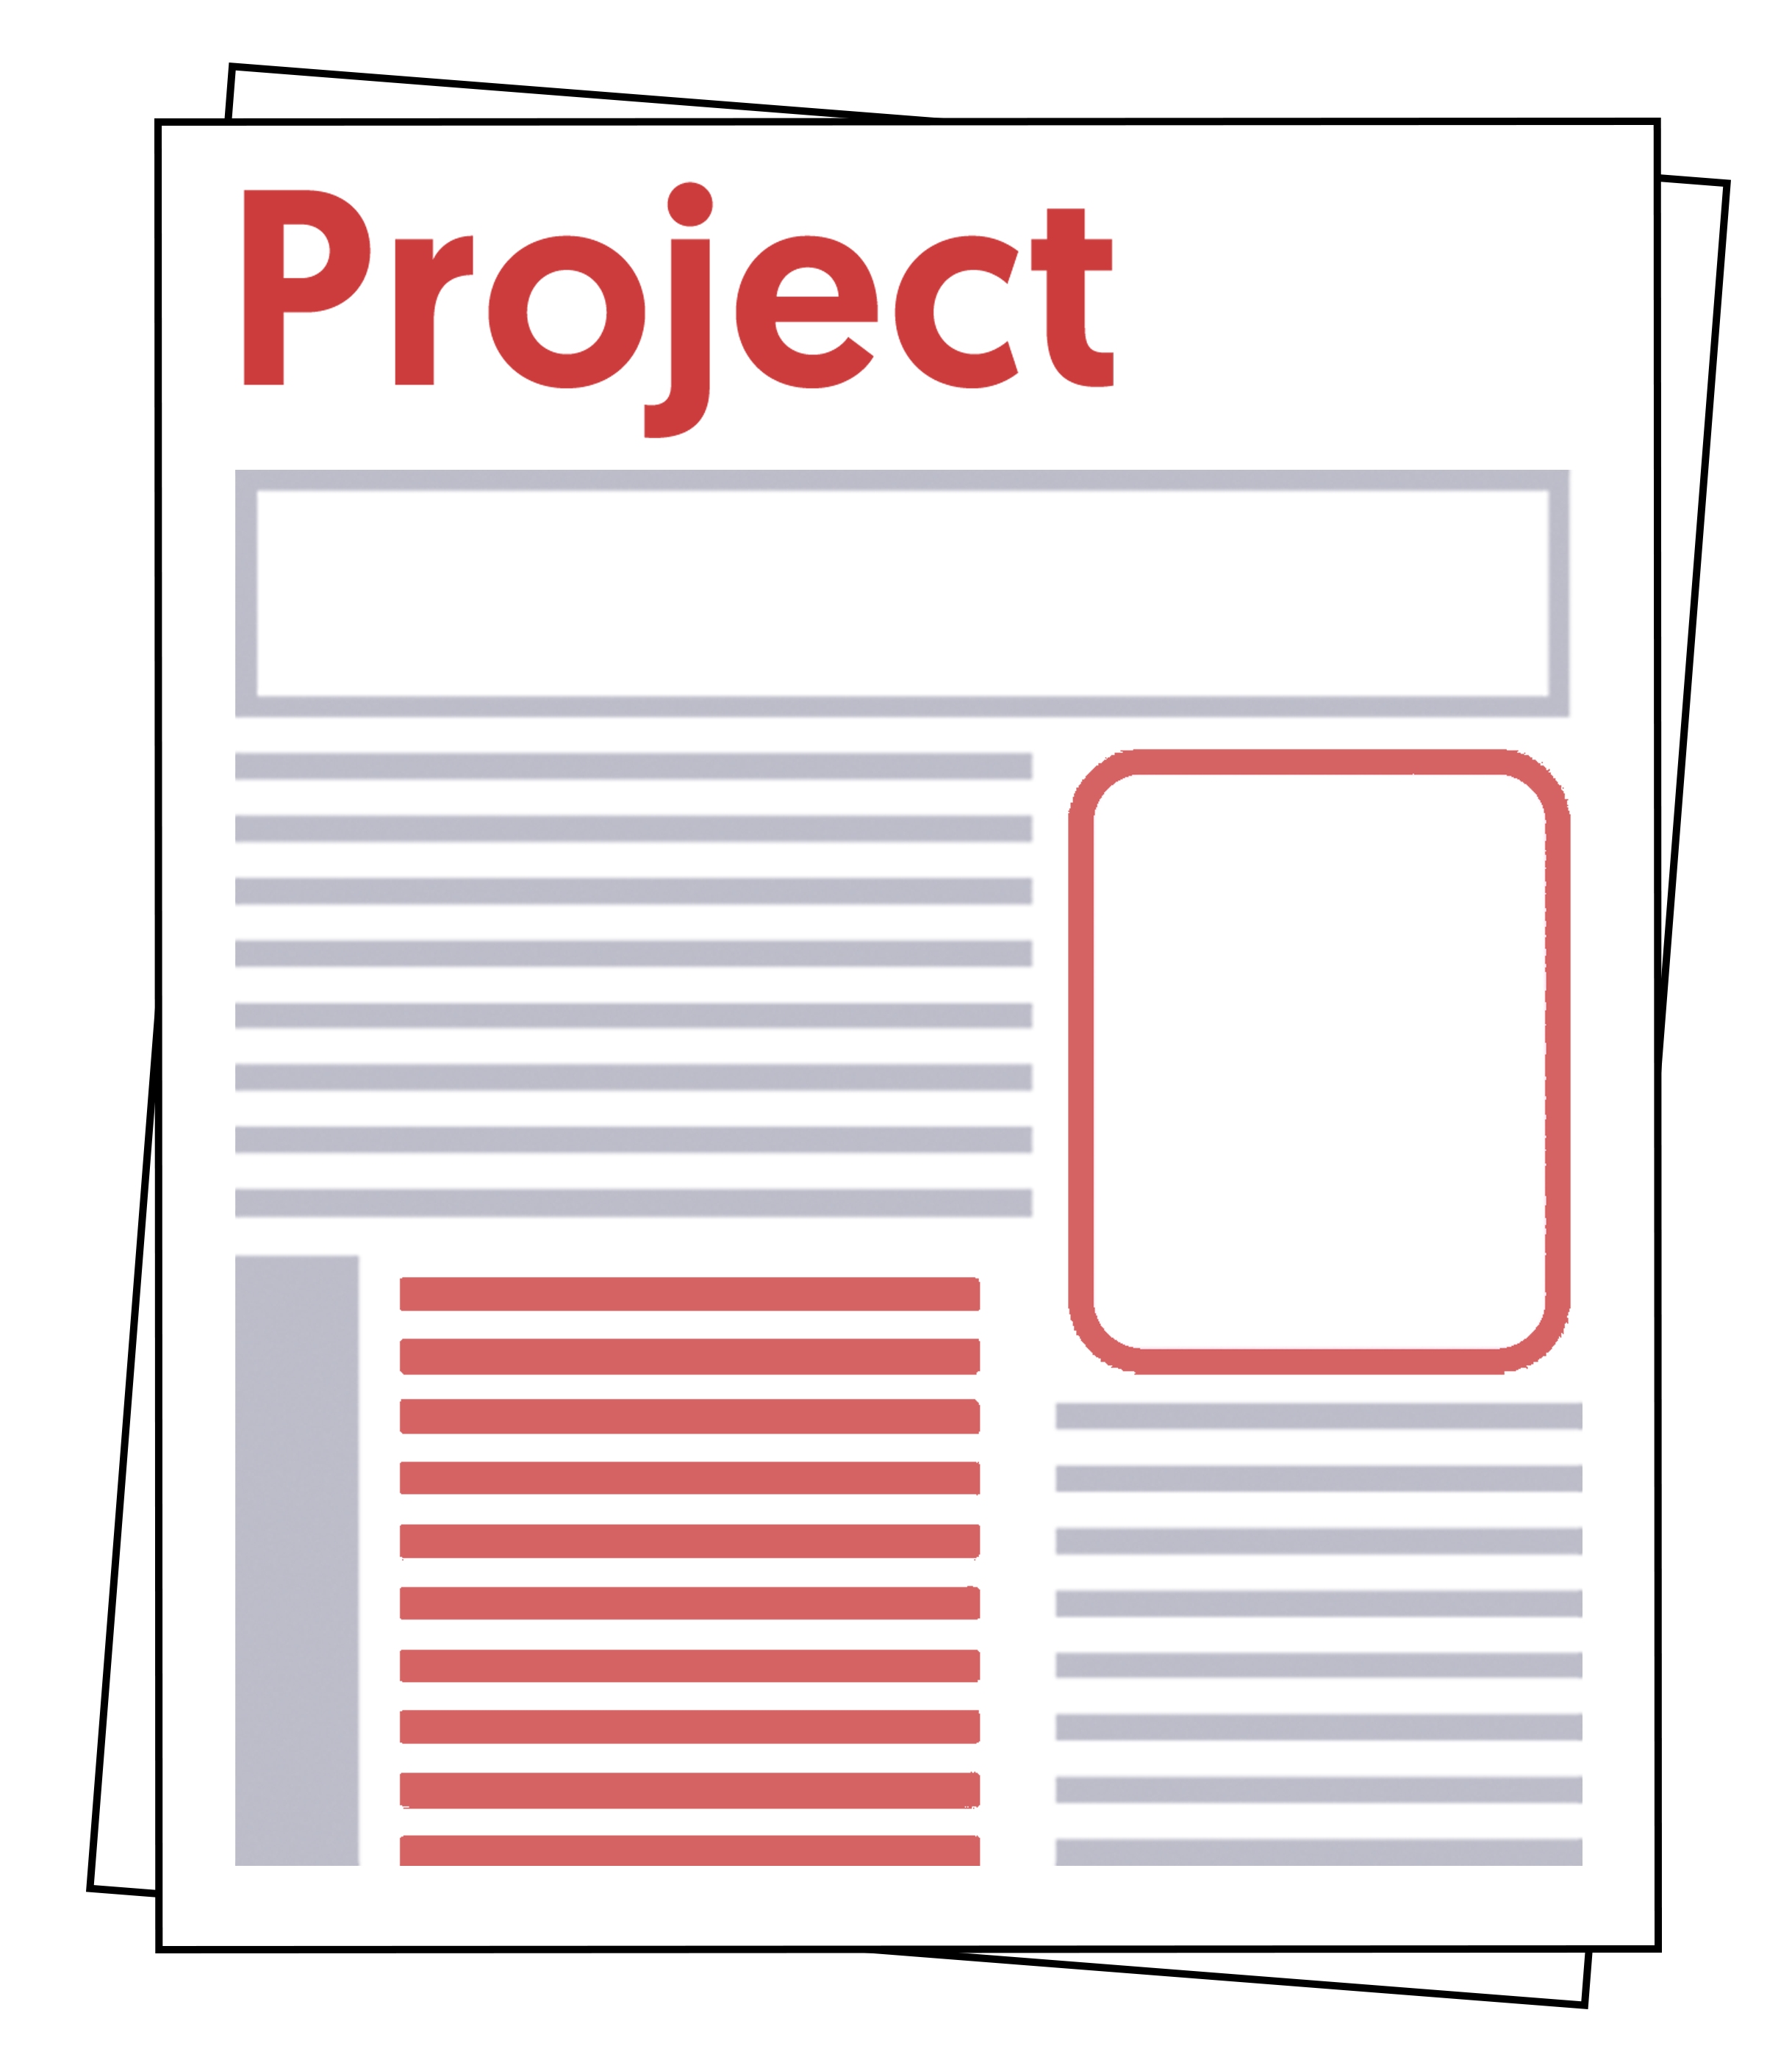 An easy read image of the front cover of a project document